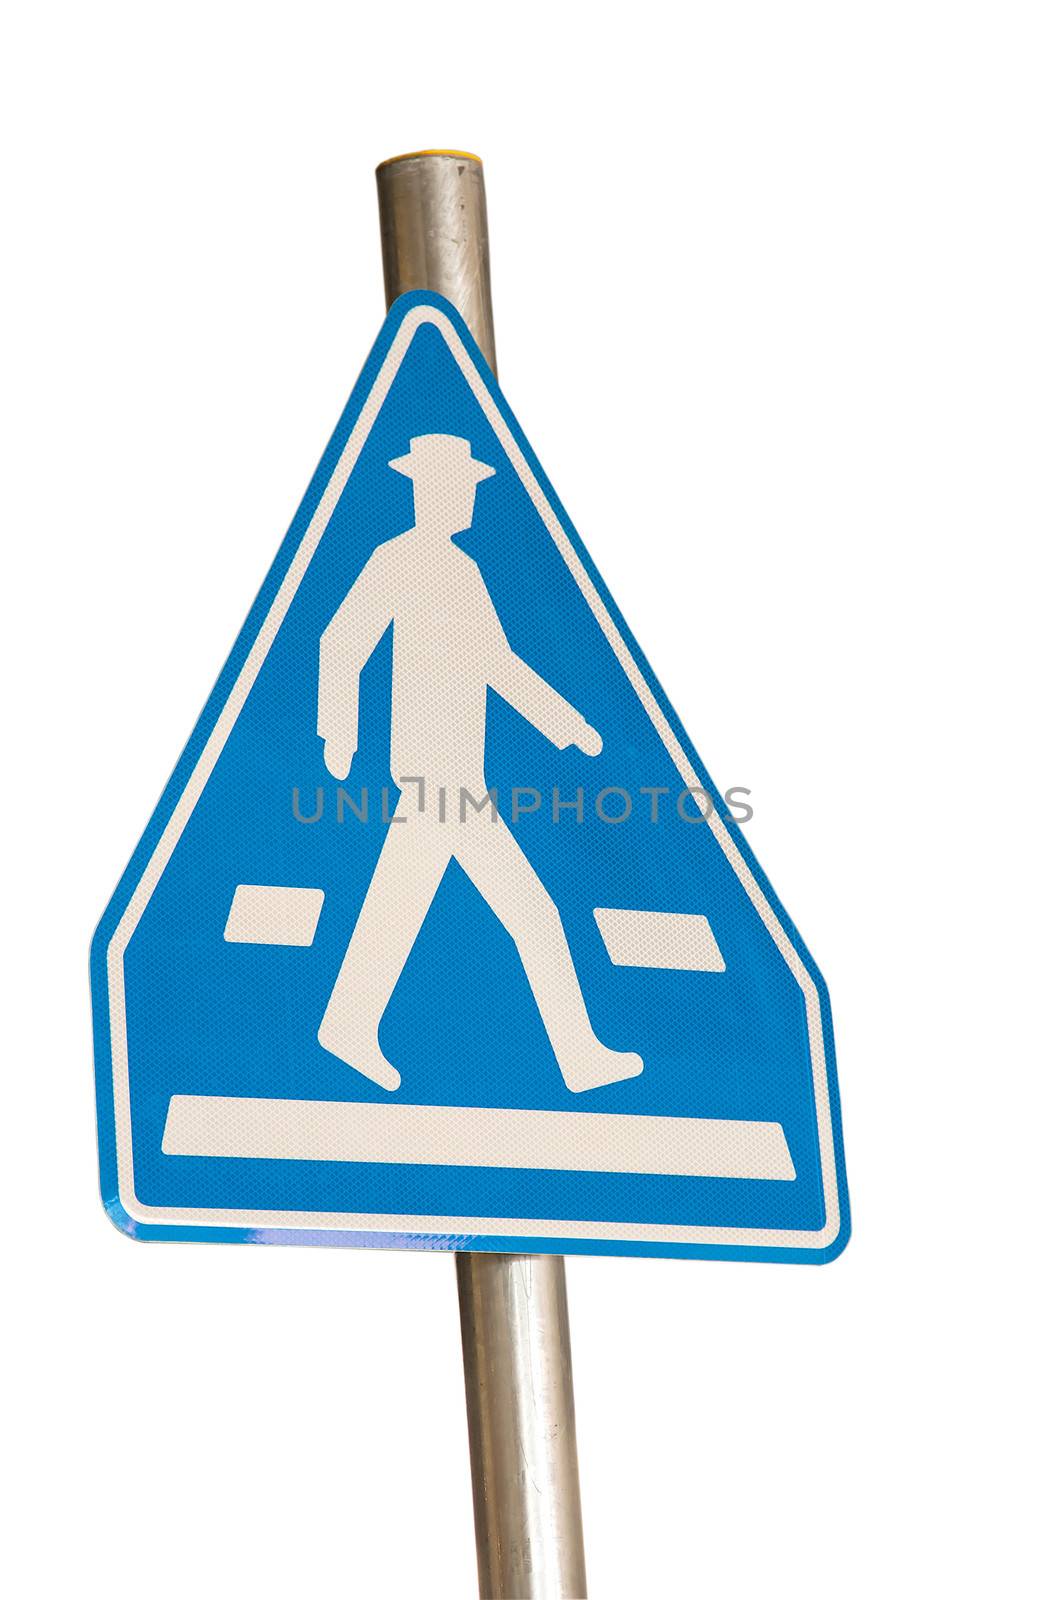 pedestrian blue traffic sign isolated on white background